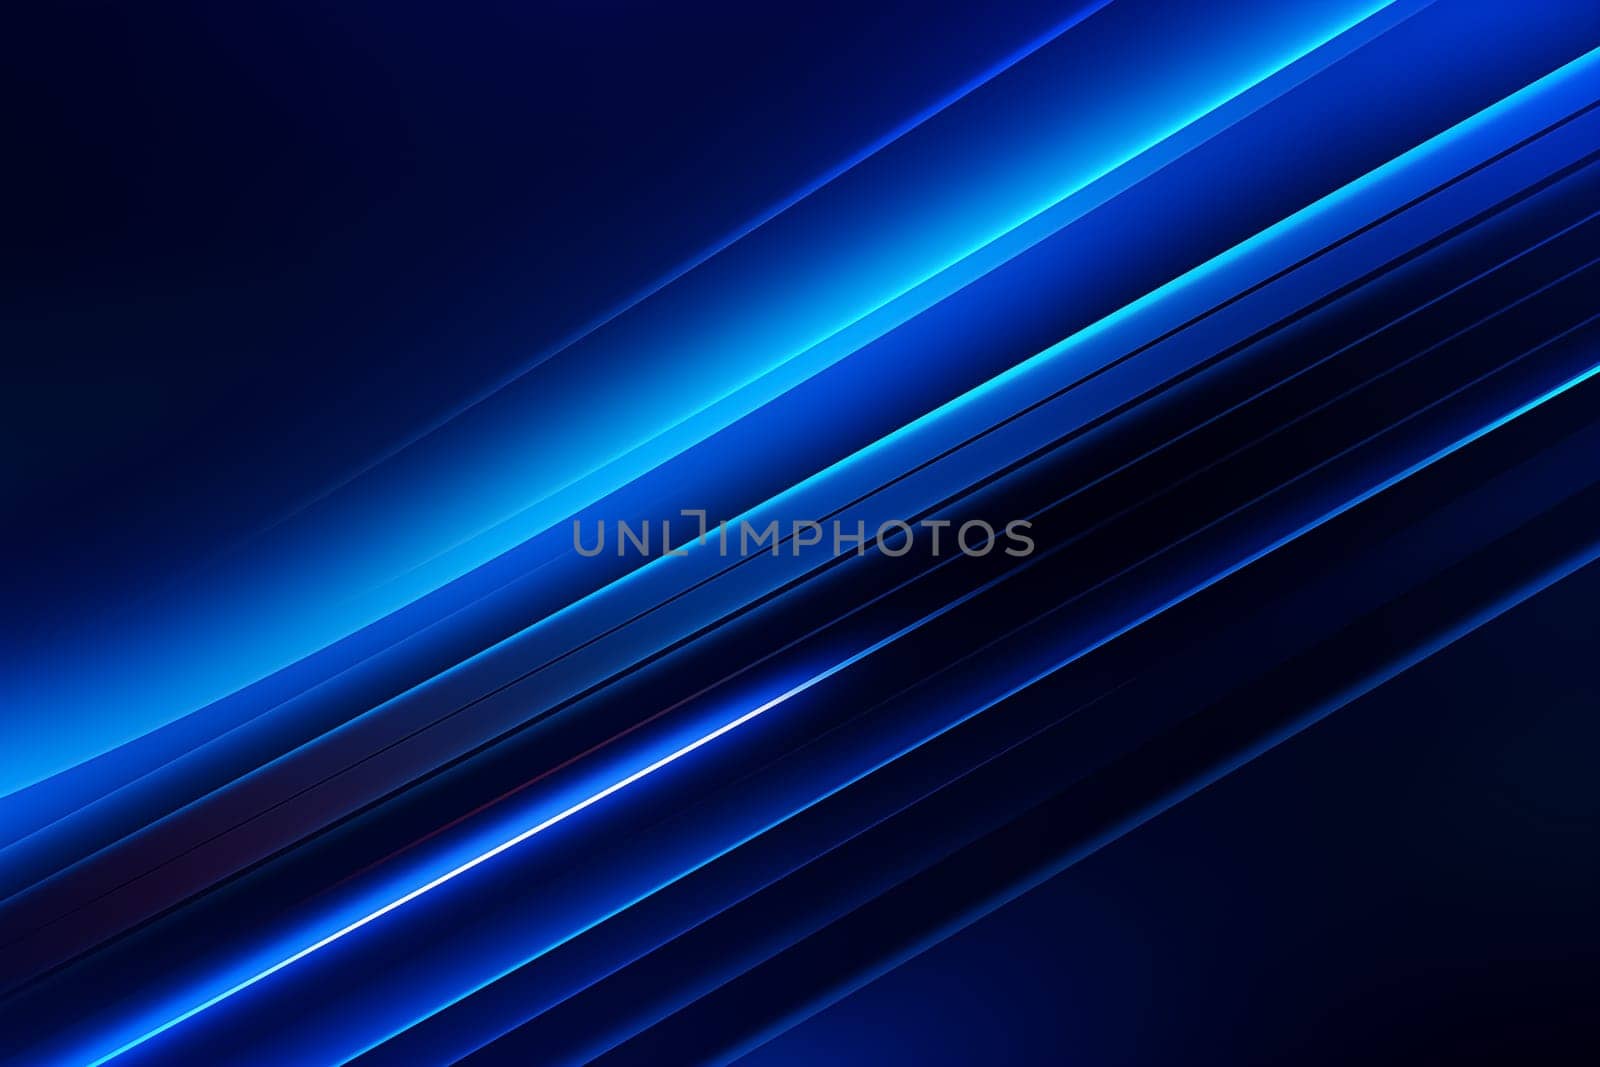 Blue abstract background with blue glowing geometric lines. Modern shiny blue diagonal rounded lines pattern. Futuristic technology concept. Suit for poster, banner, brochure, corporate, website by Nadtochiy